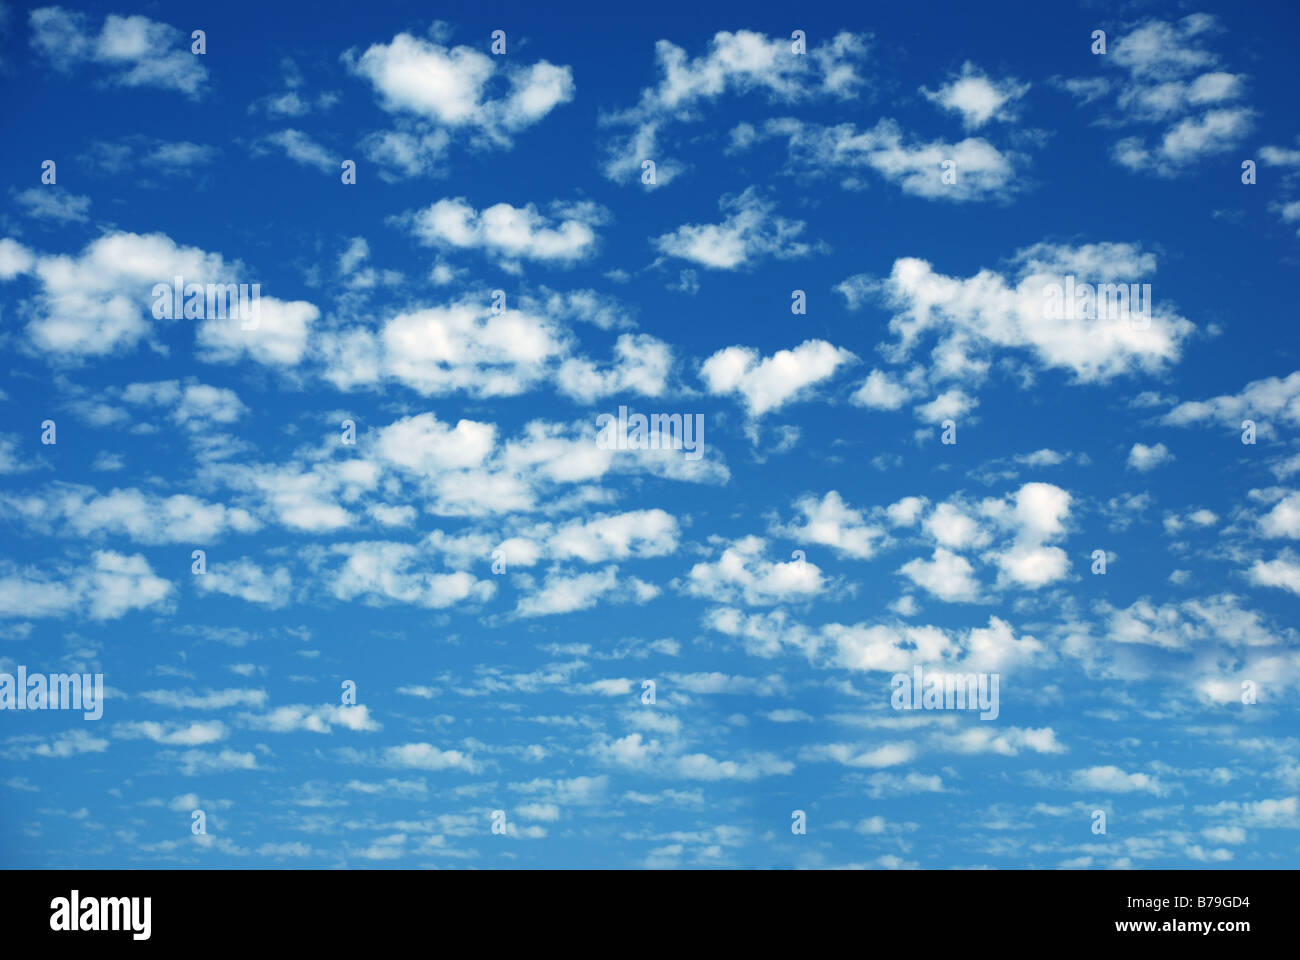 Blue sky and many small clouds Stock Photo